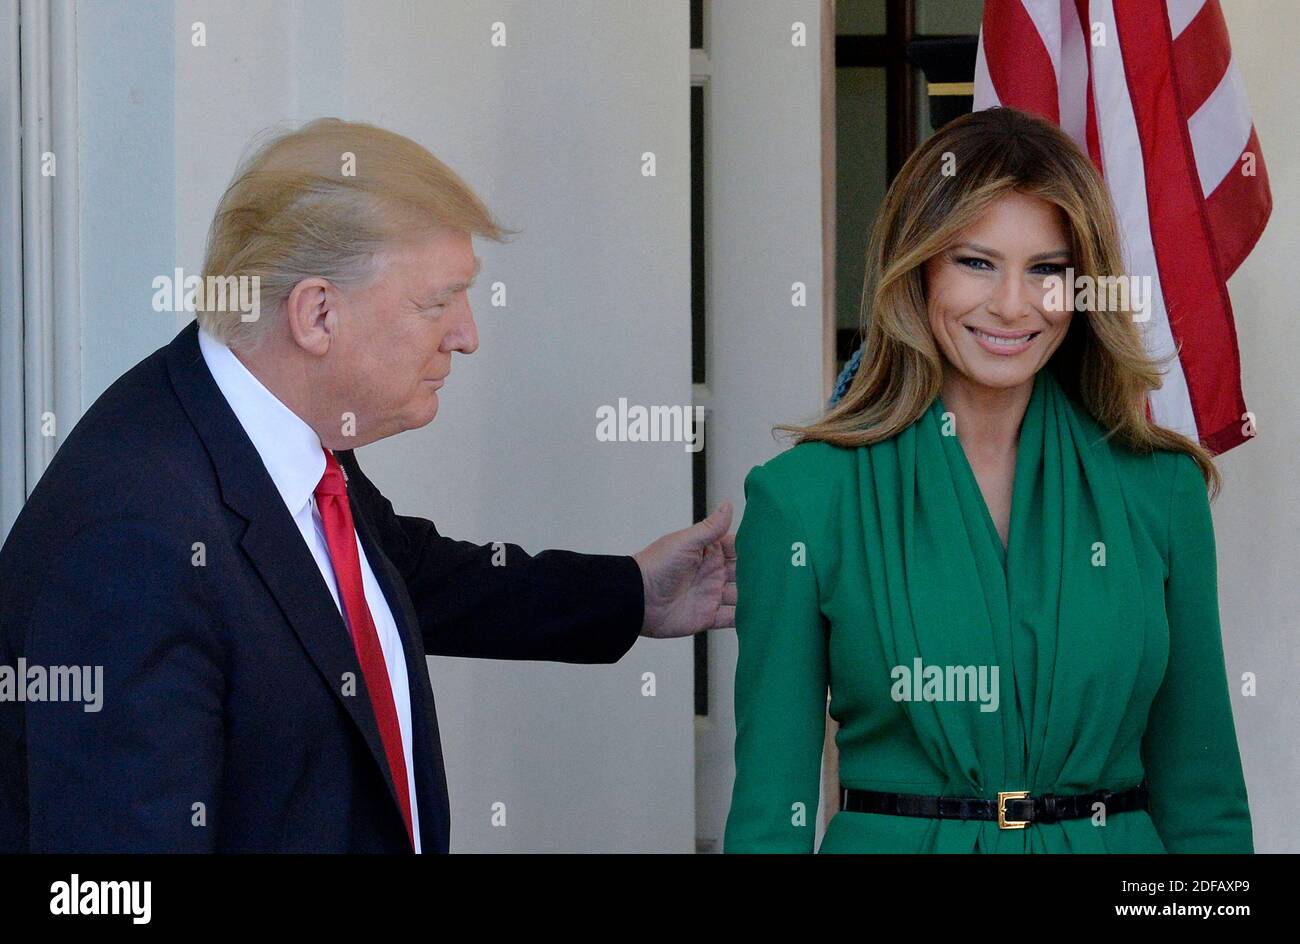 File photo - US President Donald Trump and the First Lady Melania Trump welcome King Abdullah II and Queen Rania of Jordan at the West Wing of the White House in Washington, DC, April 5, 2017.A new, scrupulously reported biography by Washington Post reporter Mary Jordan argues that the first lady is not a pawn but a player, an accessory in the second as much as the first sense, and a woman able to get what she wants from one of the most powerful and transparently vain men in the world. The book is called The Art of Her Deal. Photo by Olivier Douliery/ Abaca Stock Photo